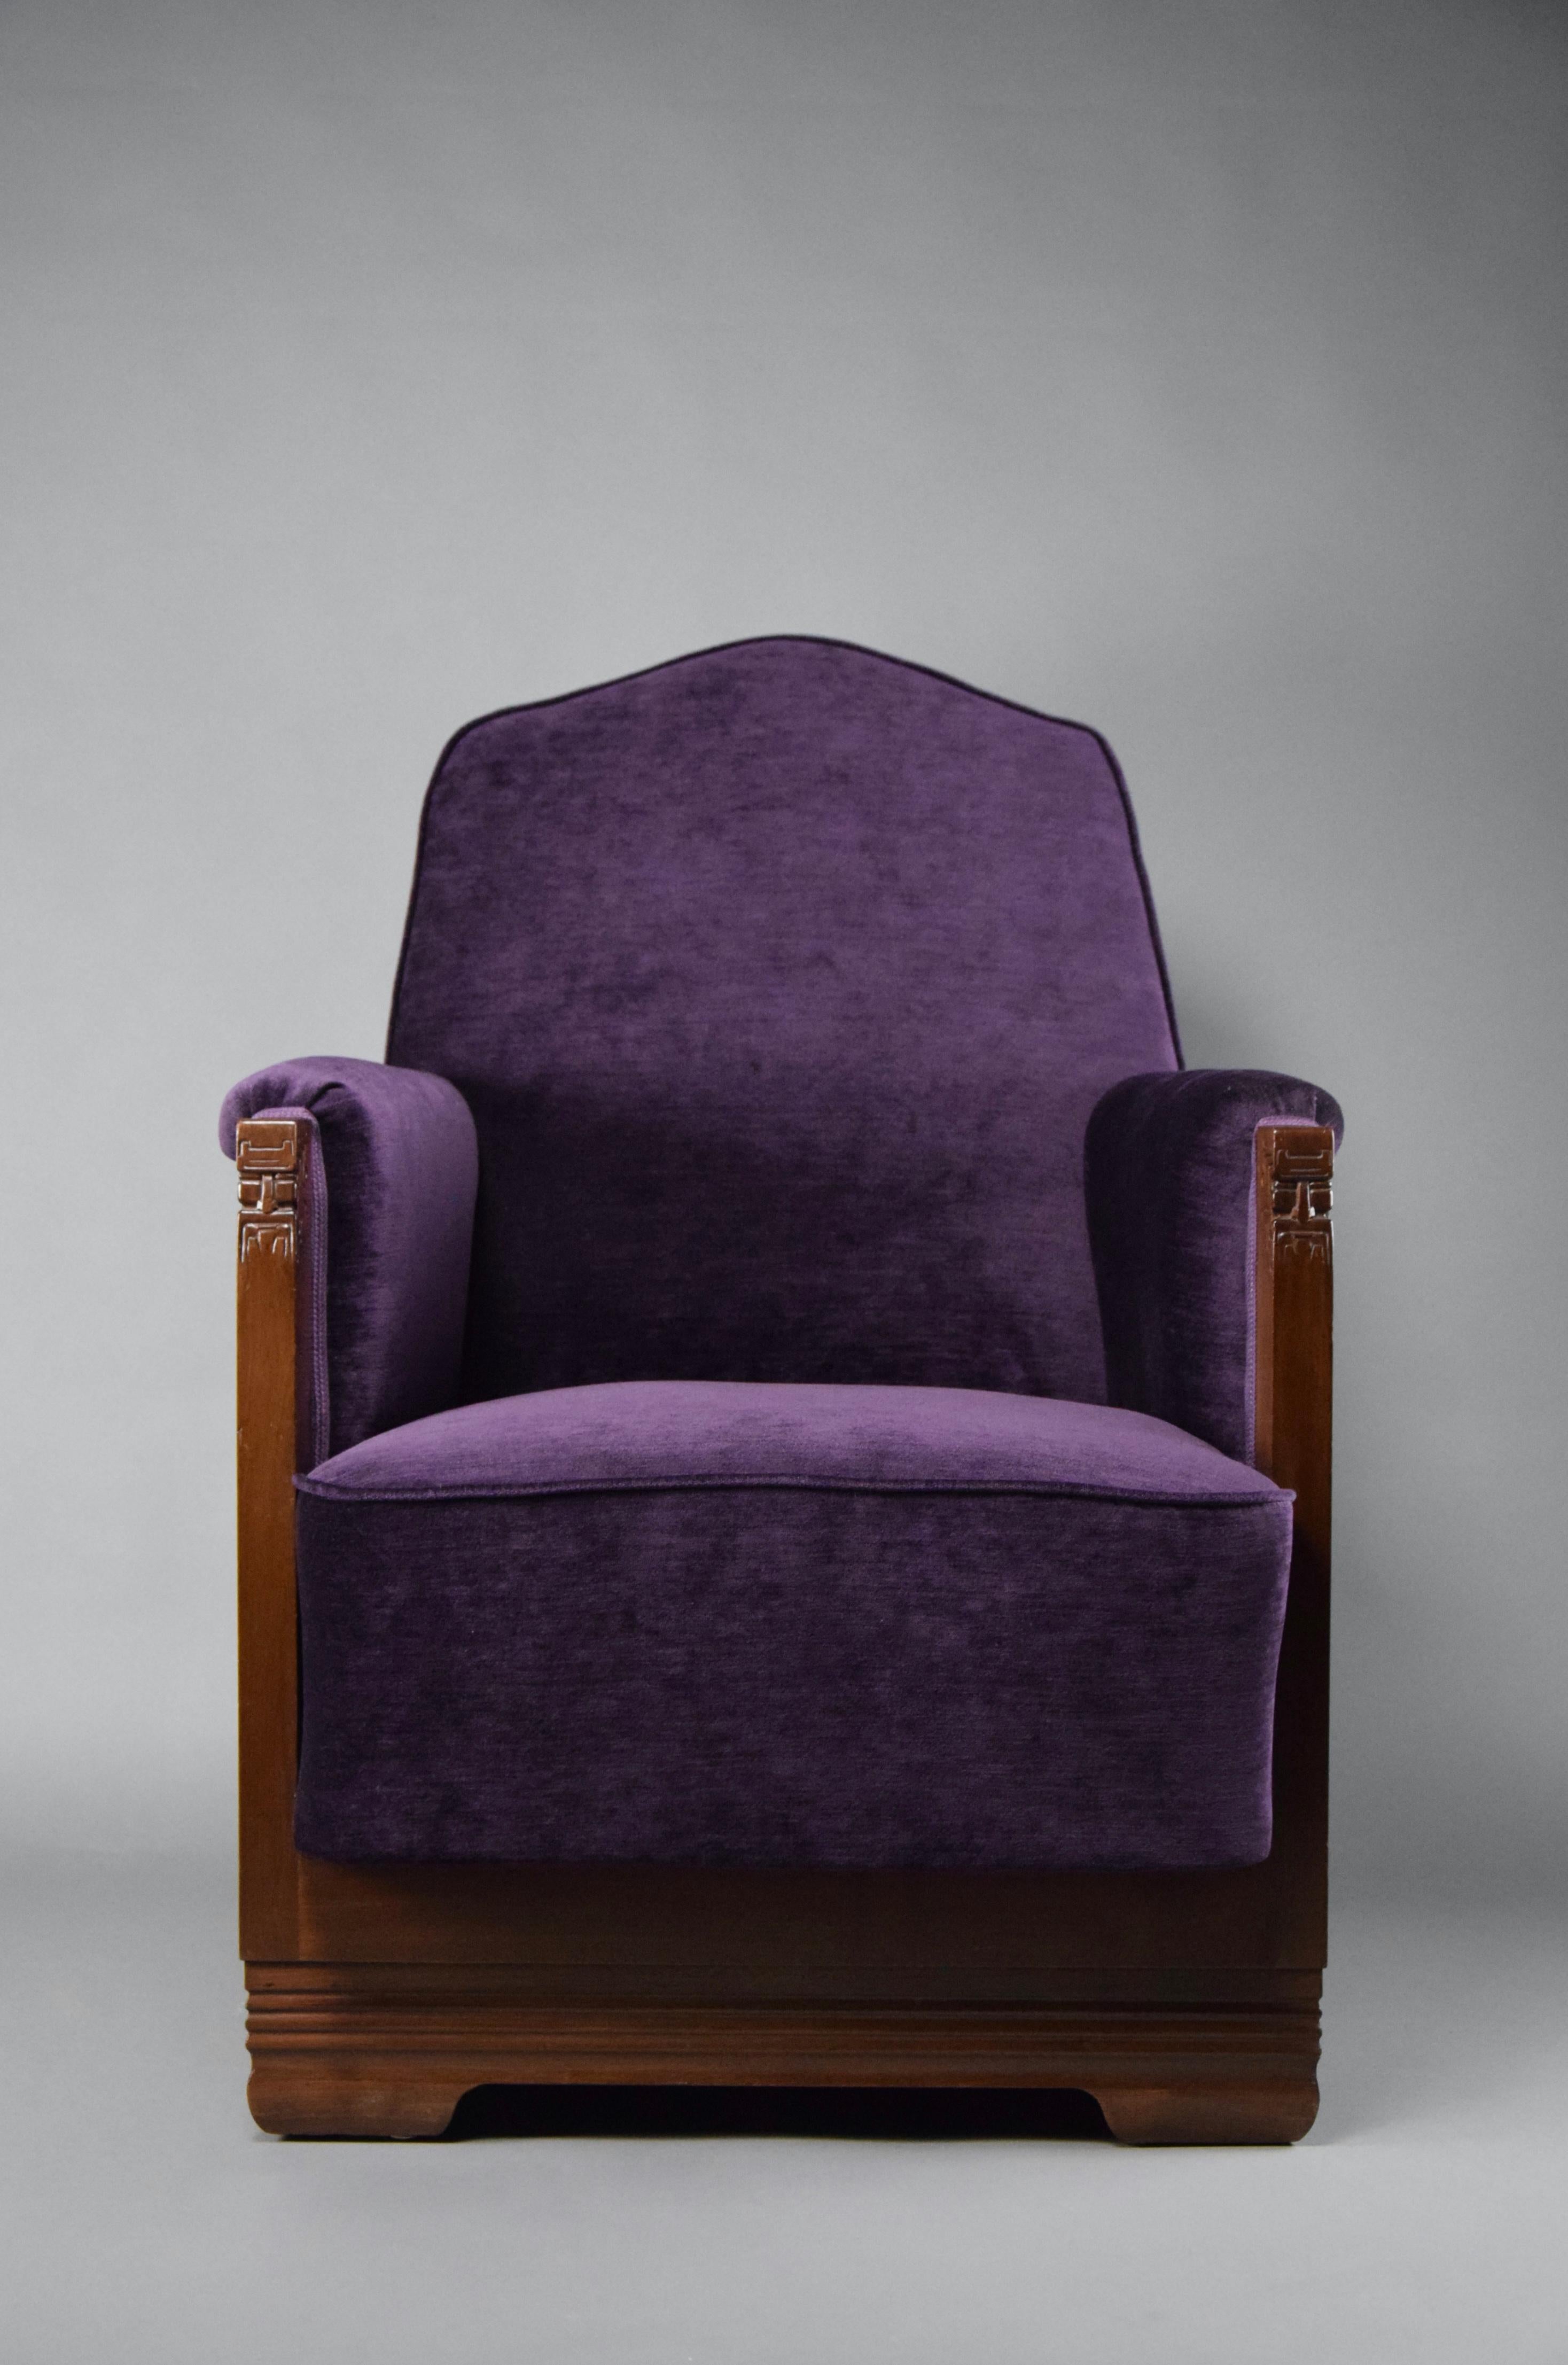 Looking for a unique and elegant addition to your home or office? Look no further than this stunning lounge chair designed by C.A. Lion Cachet. Crafted with Jatoba and oak frames and upholstered in sumptuous purple velvet, these chair is the epitome